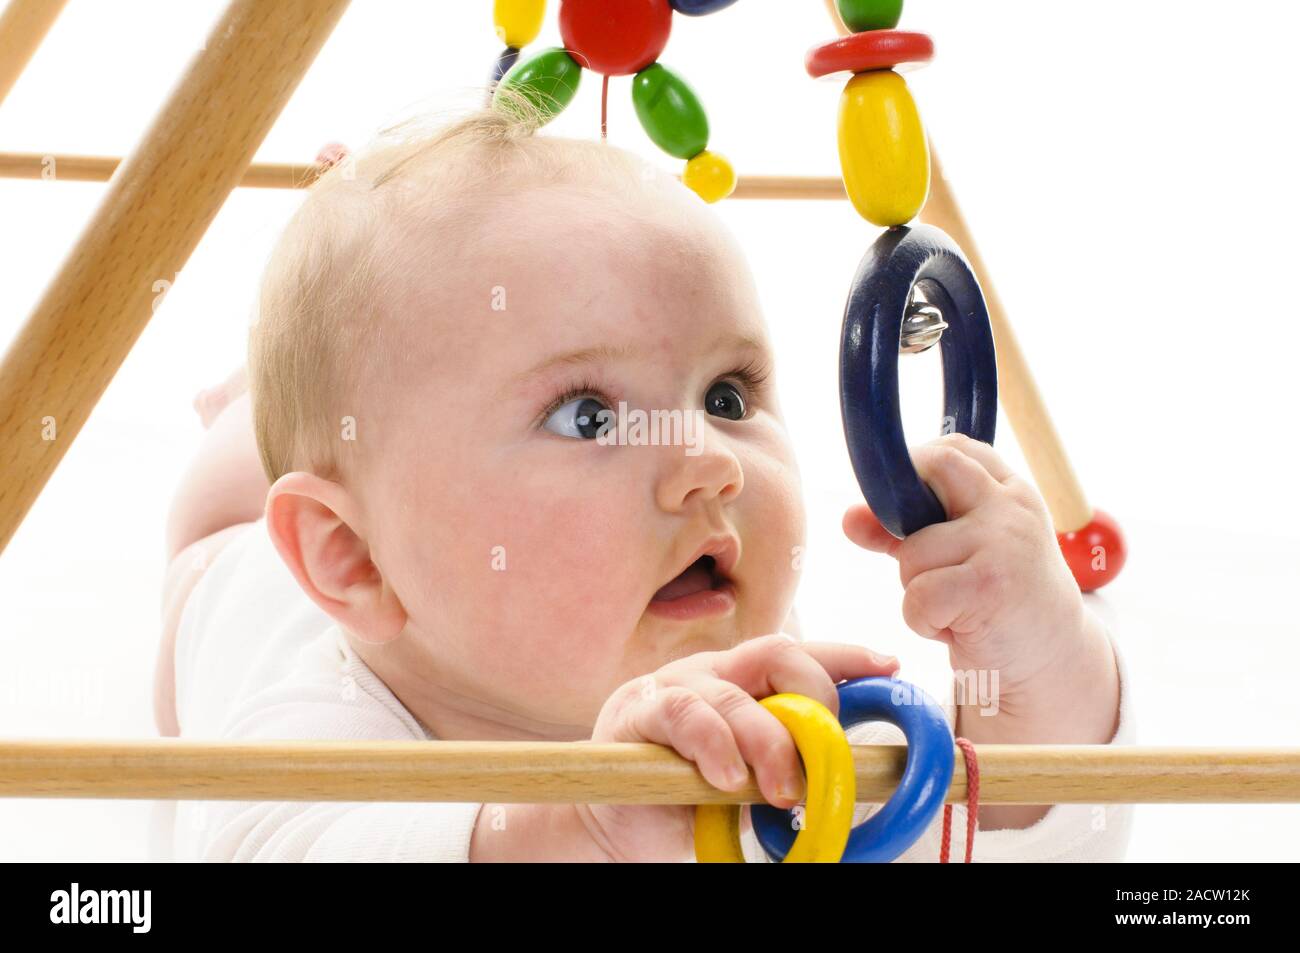 Baby with gripping toy Stock Photo